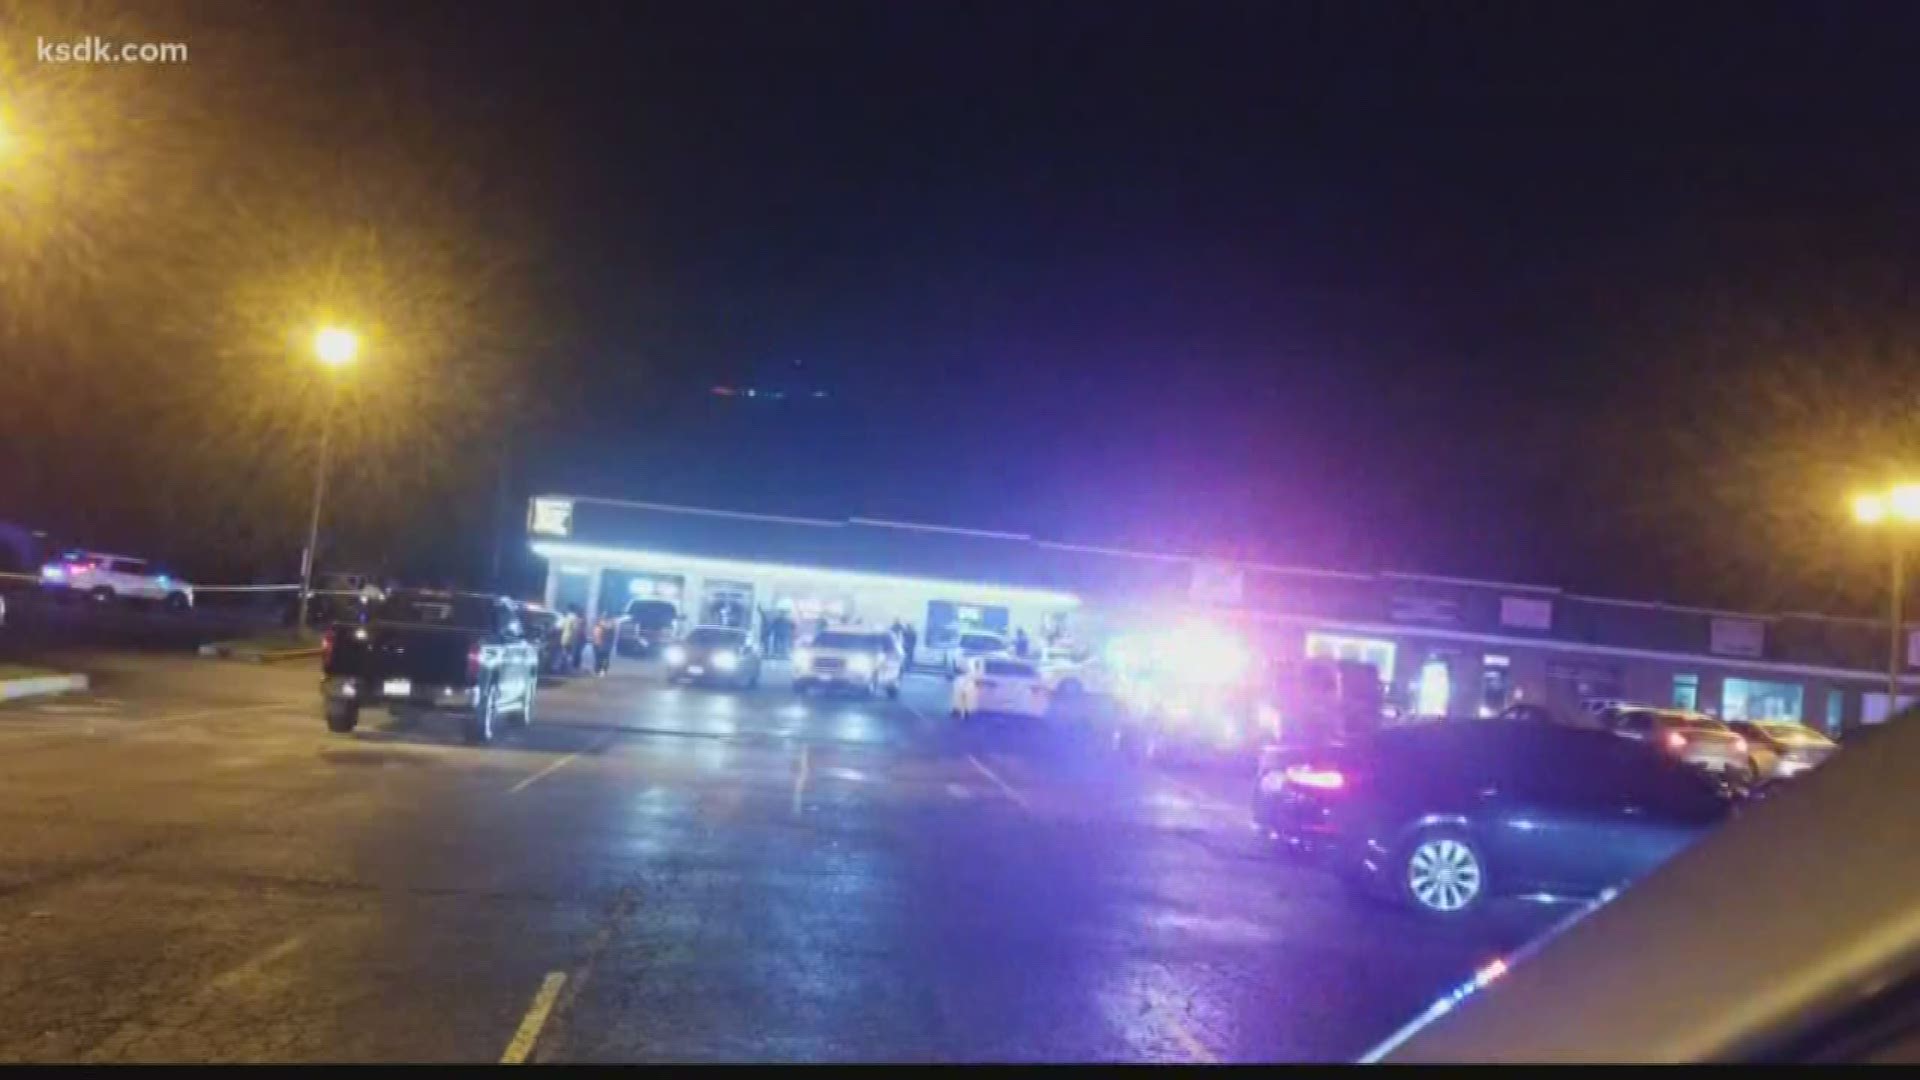 A 36-year-old man was shot in the parking lot of the bar Saturday night.